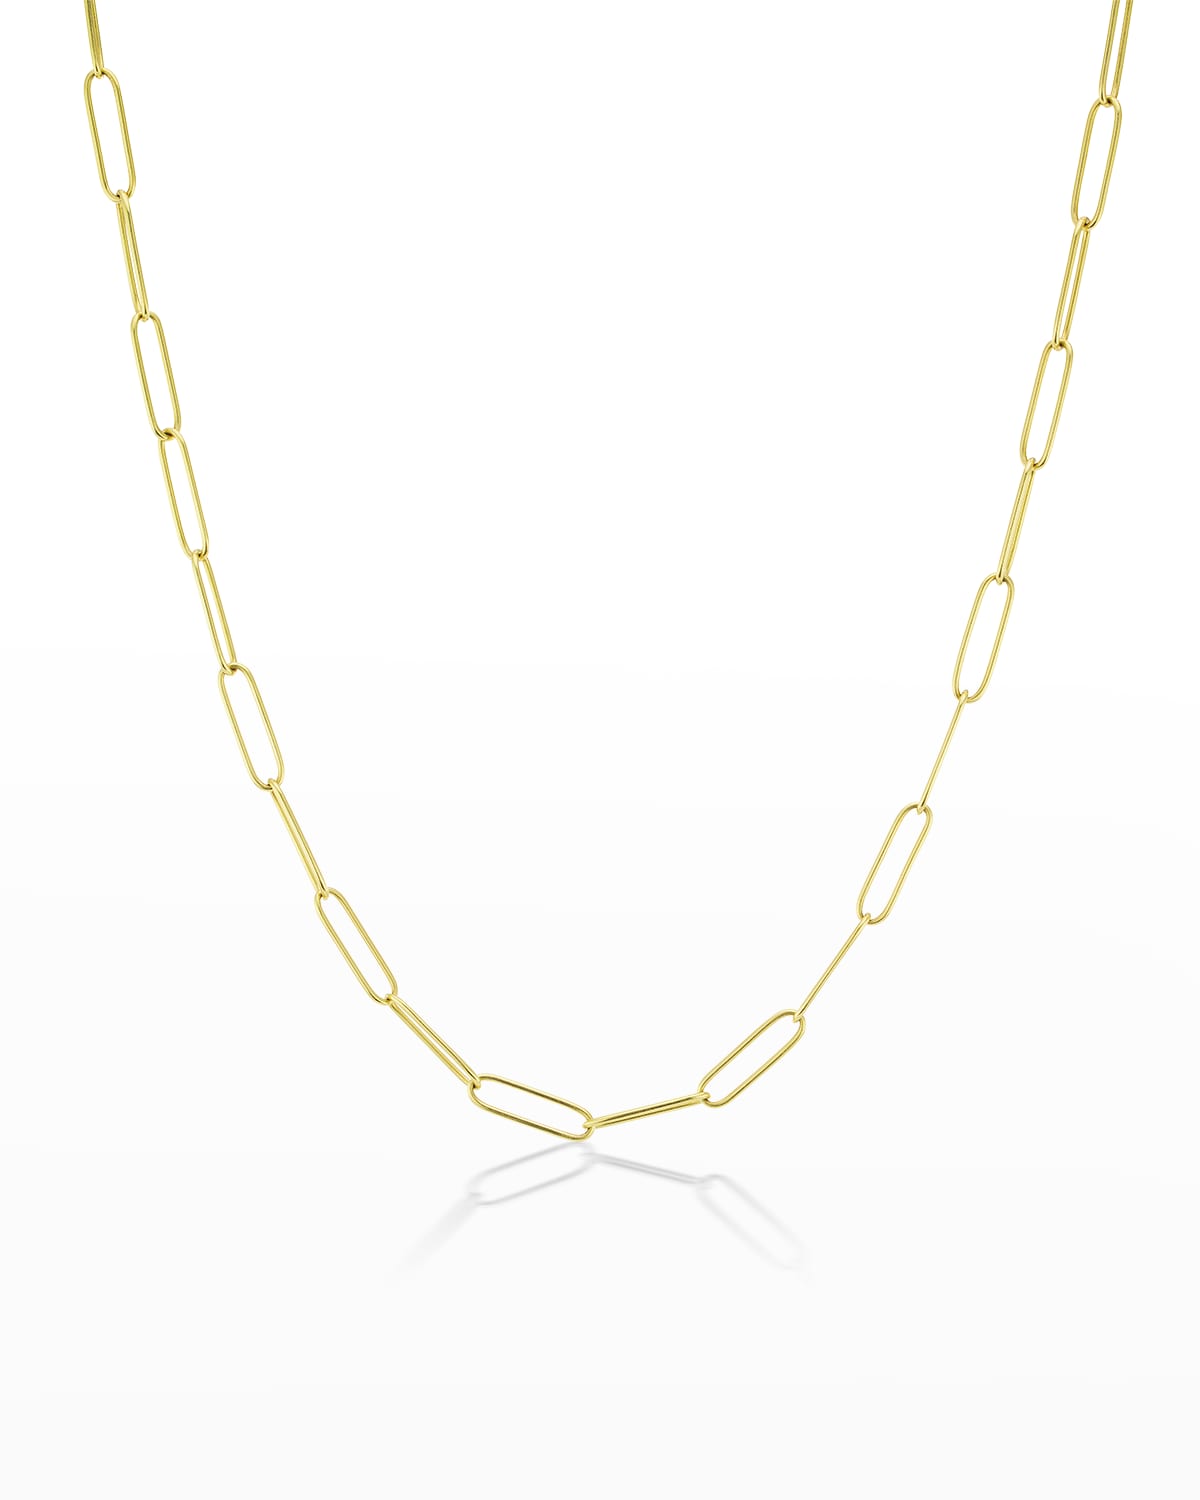 Yellow Gold Paperclip Chain, 18"L